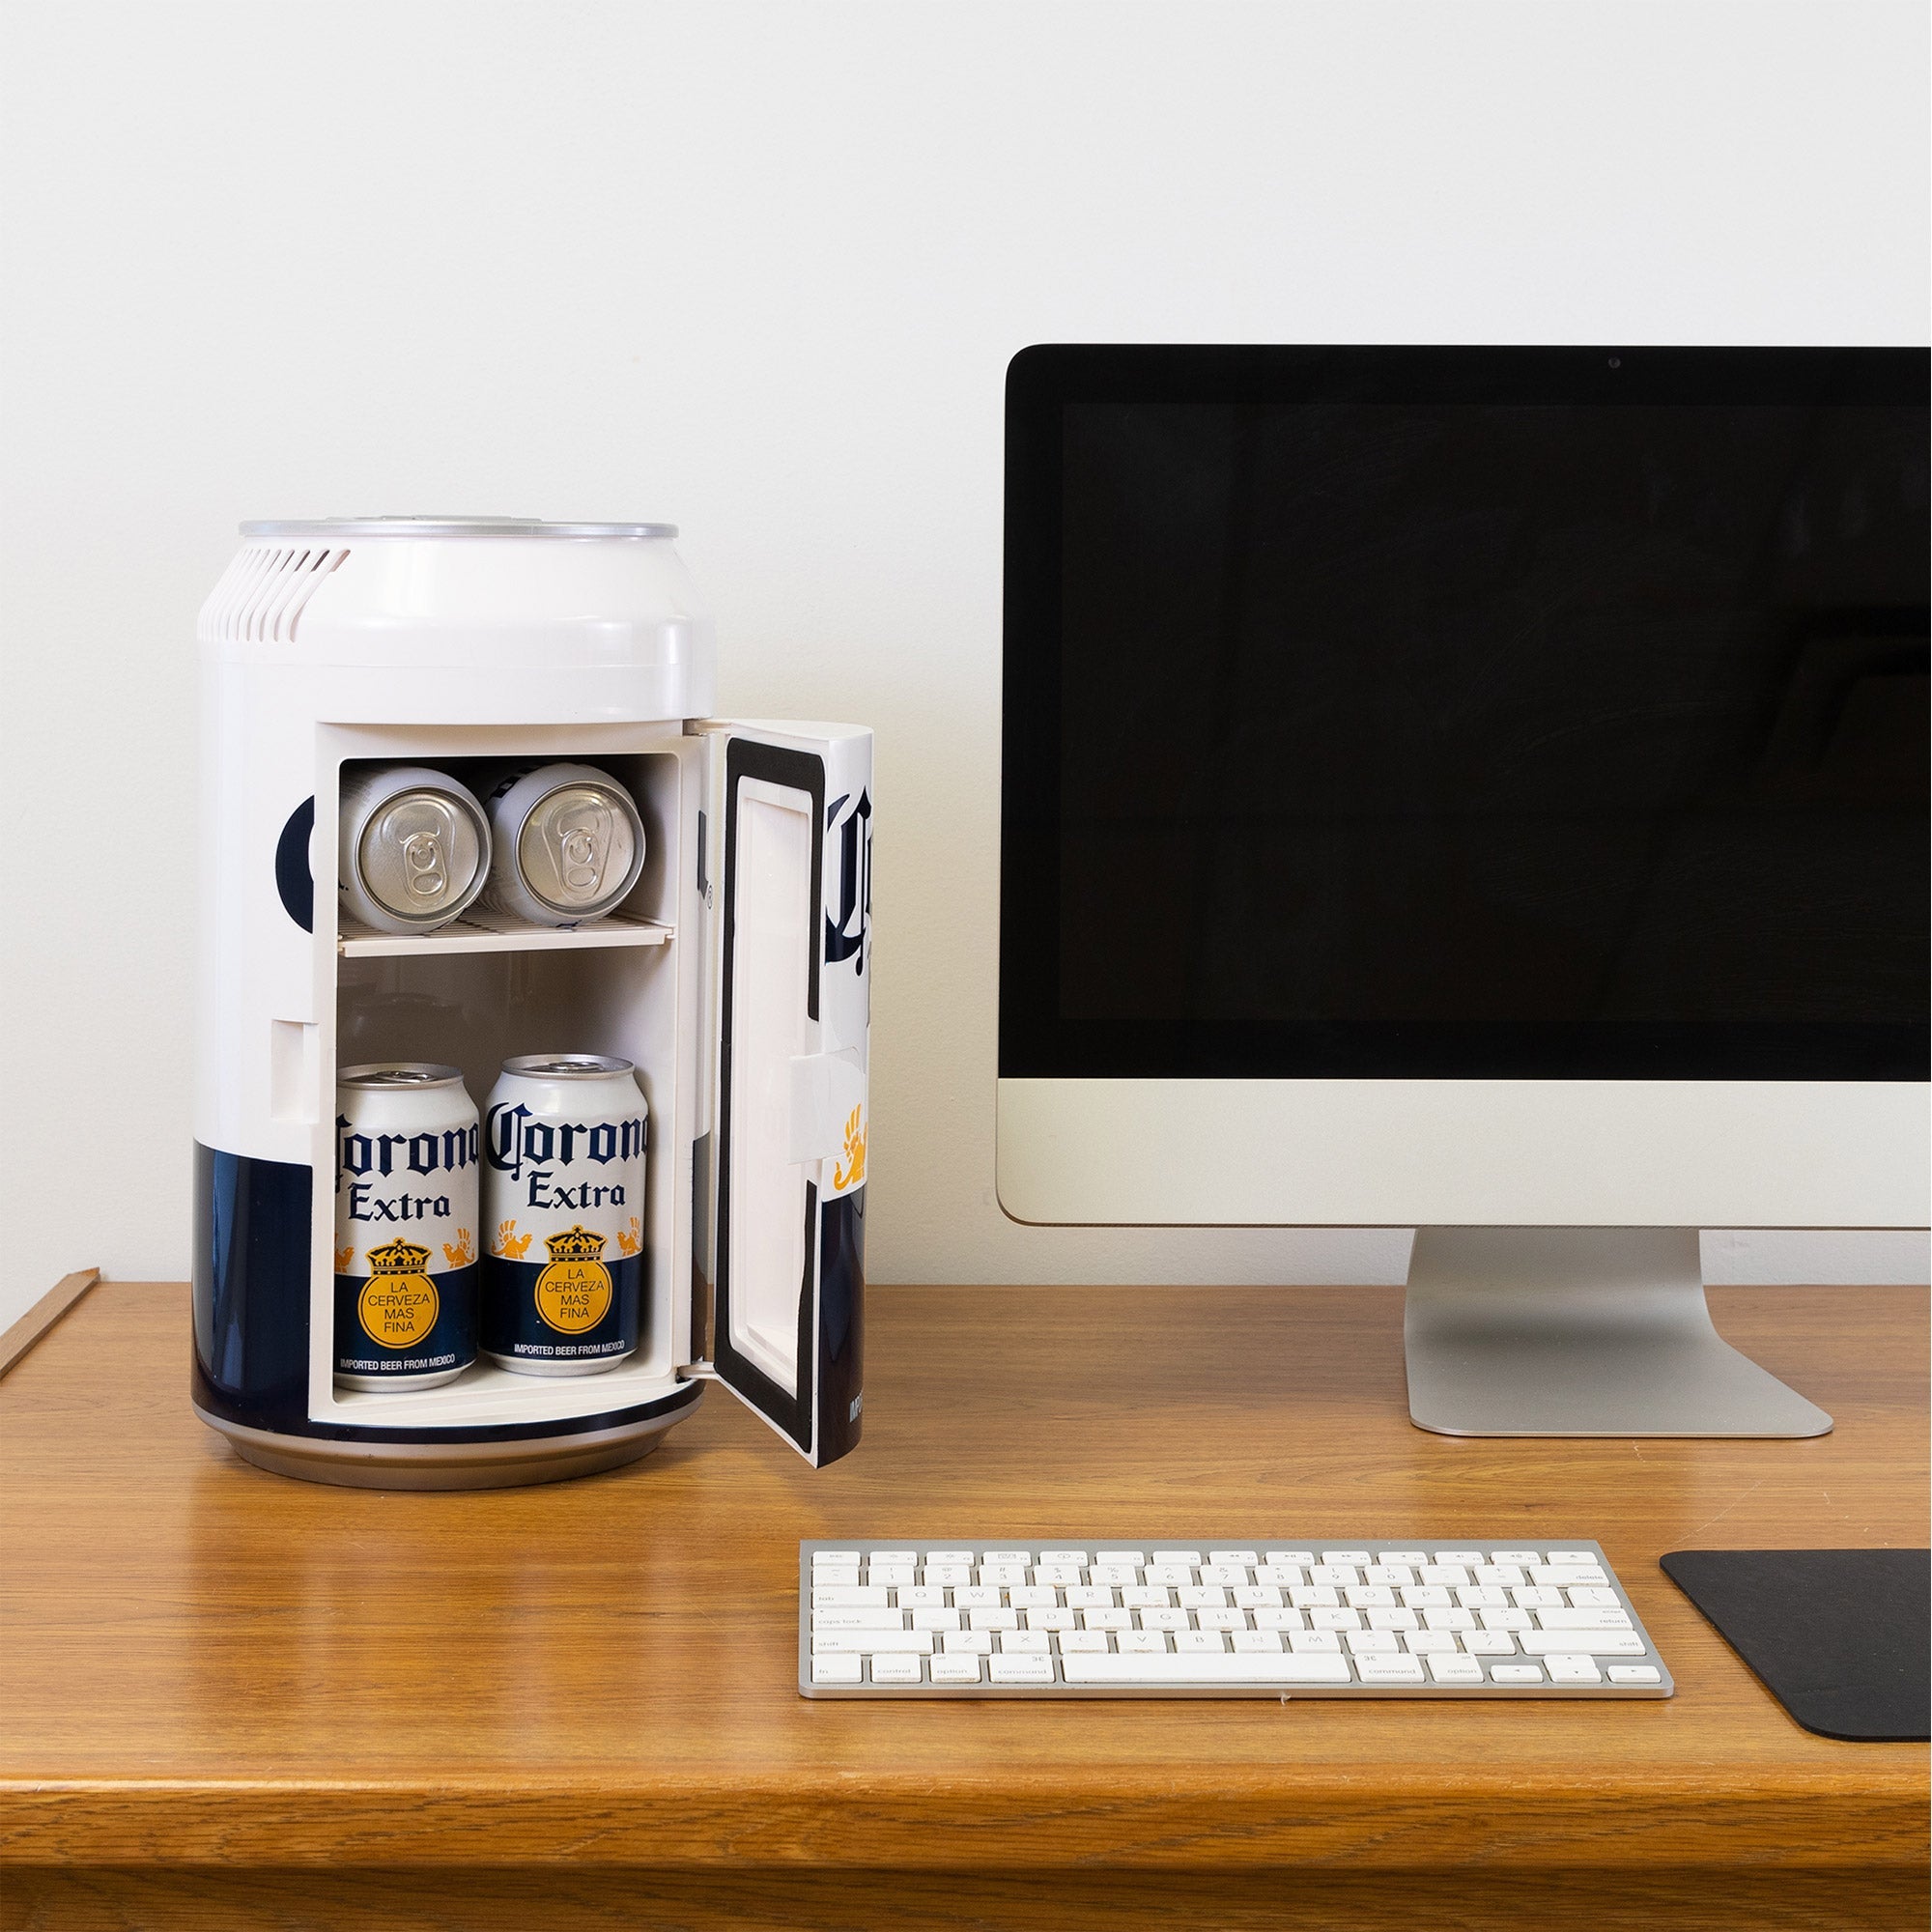 Lifestyle image of Corona can-shaped mini fridge, open with 6 cans of Corona beer inside, on a wooden desktop with a computer monitor and keyboard beside it